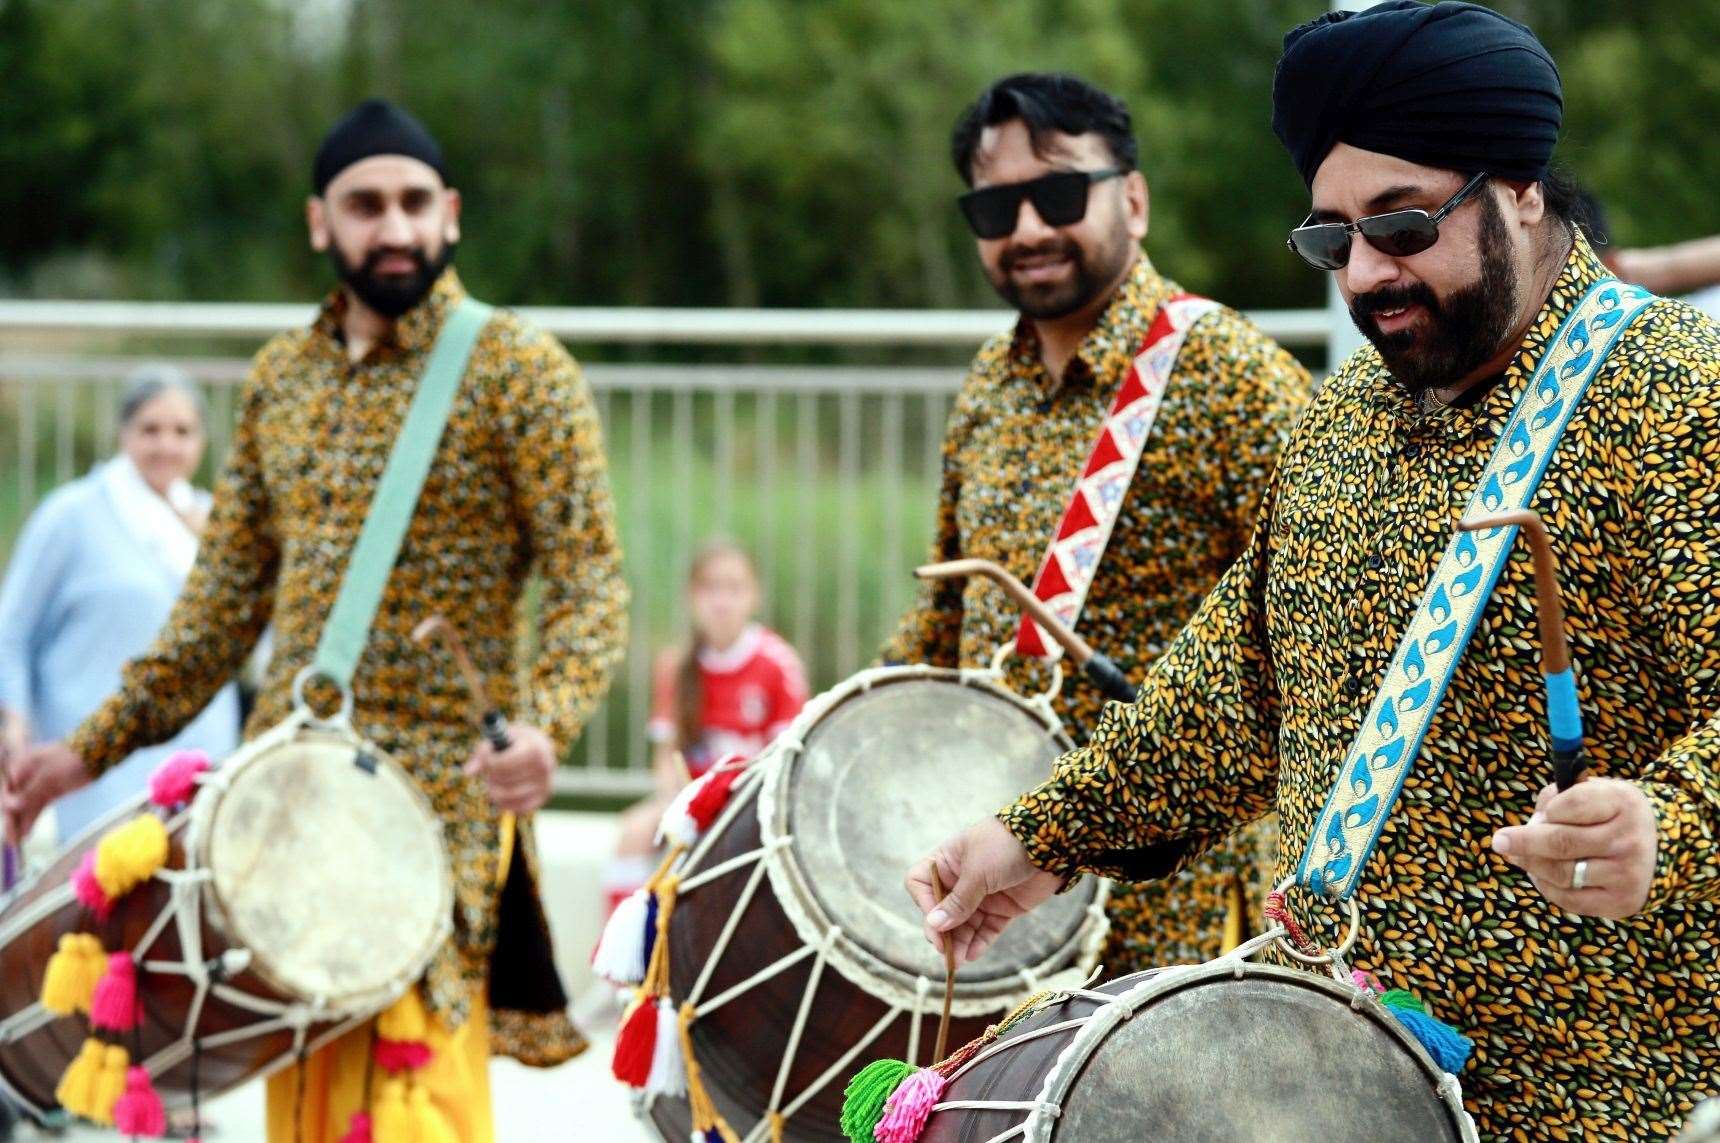 There were multiple performances including Dhol drumming. Picture: Cohesion Plus